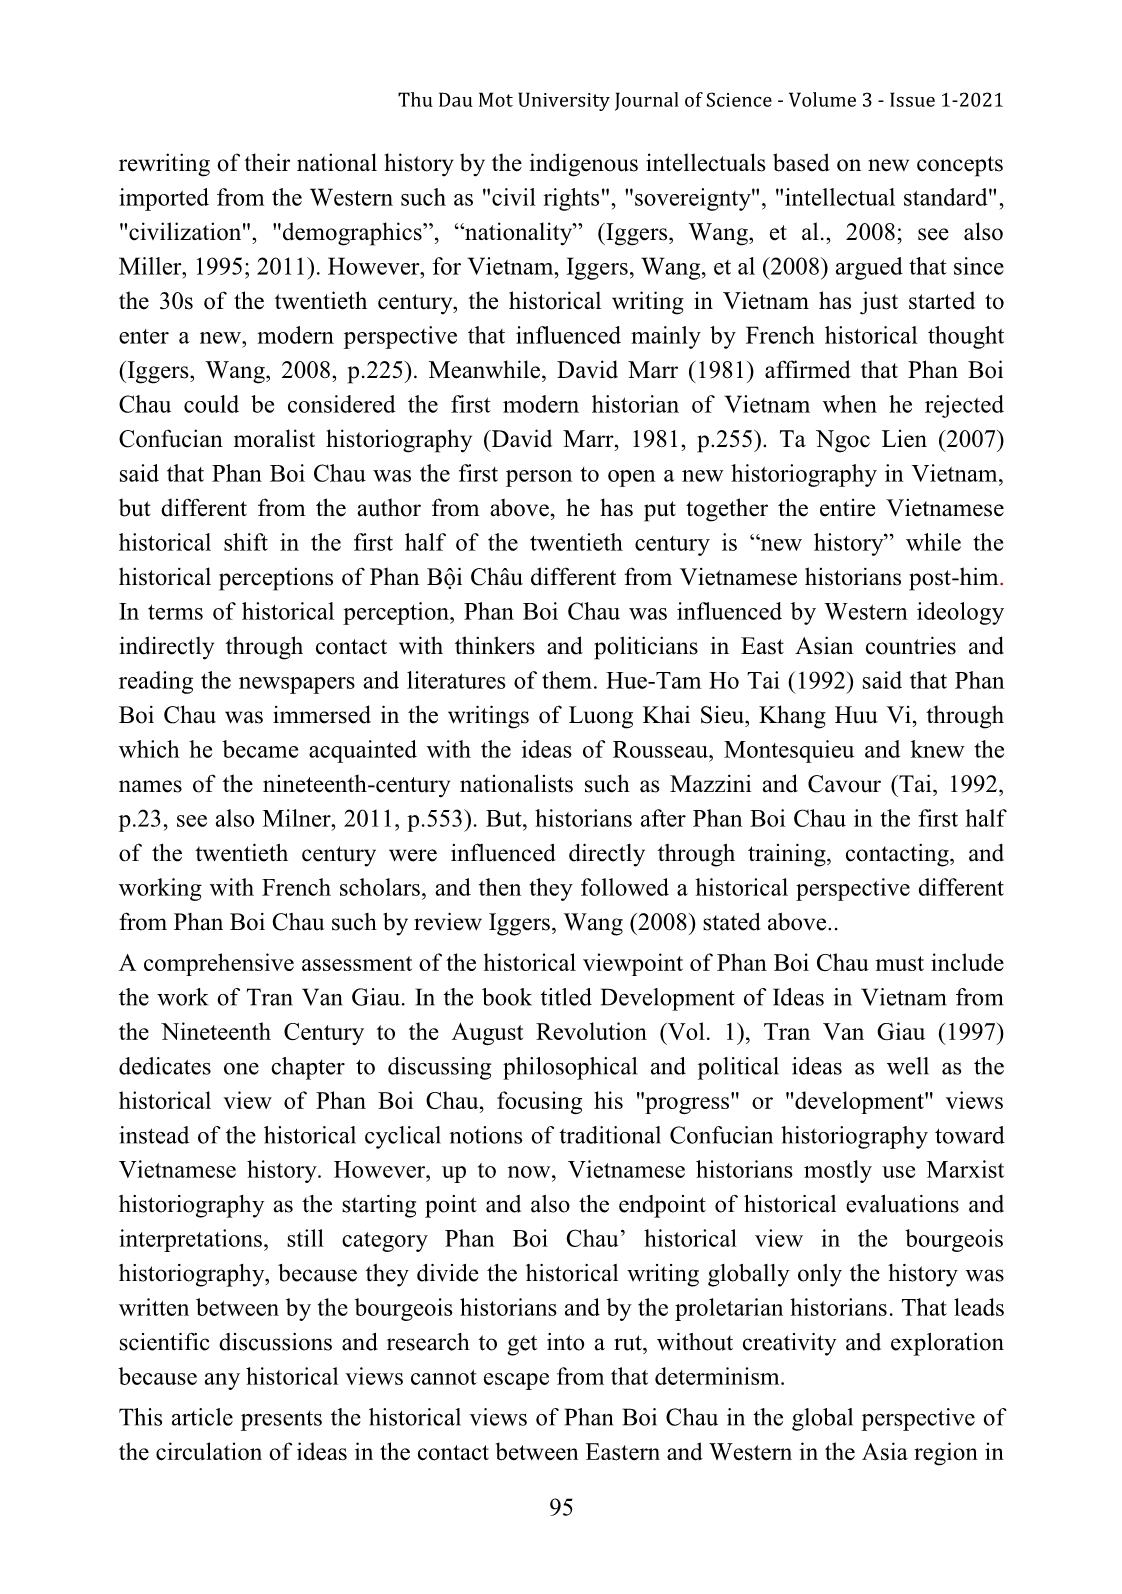 The Shift in historical perception from tradition to modern in Viet Nam in the early twentieth century trang 2